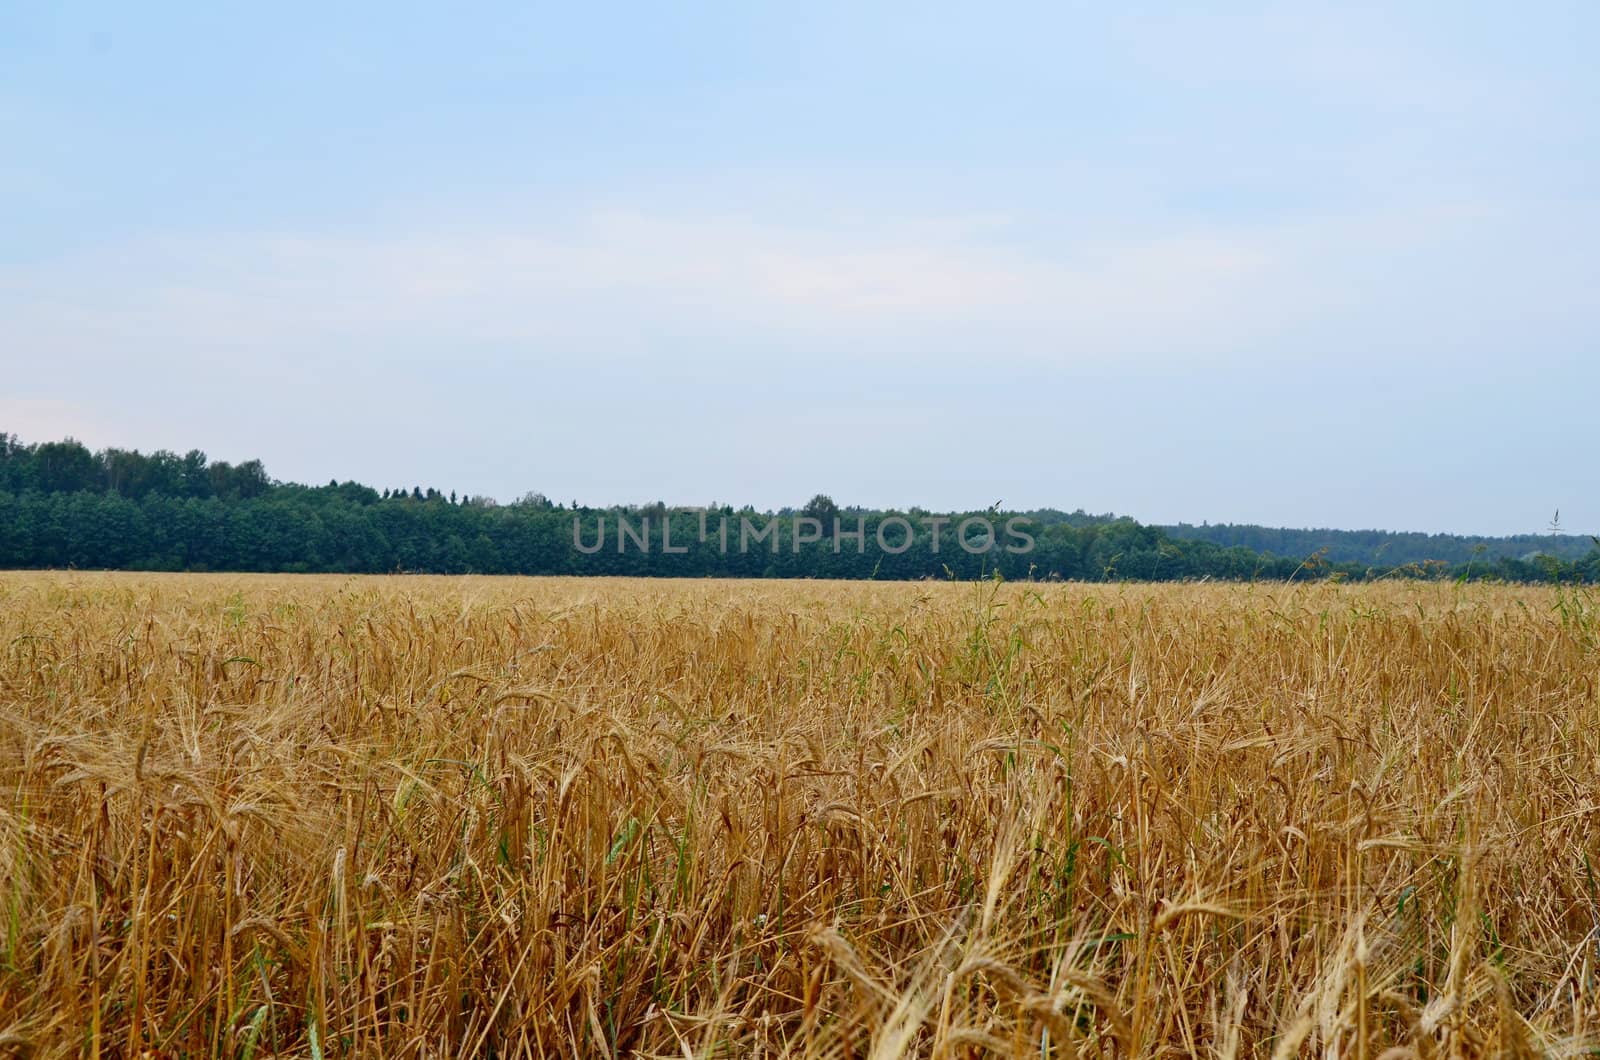 Kind in the field of wheat, in 5 km. From the city of Taldom, Moscow Region